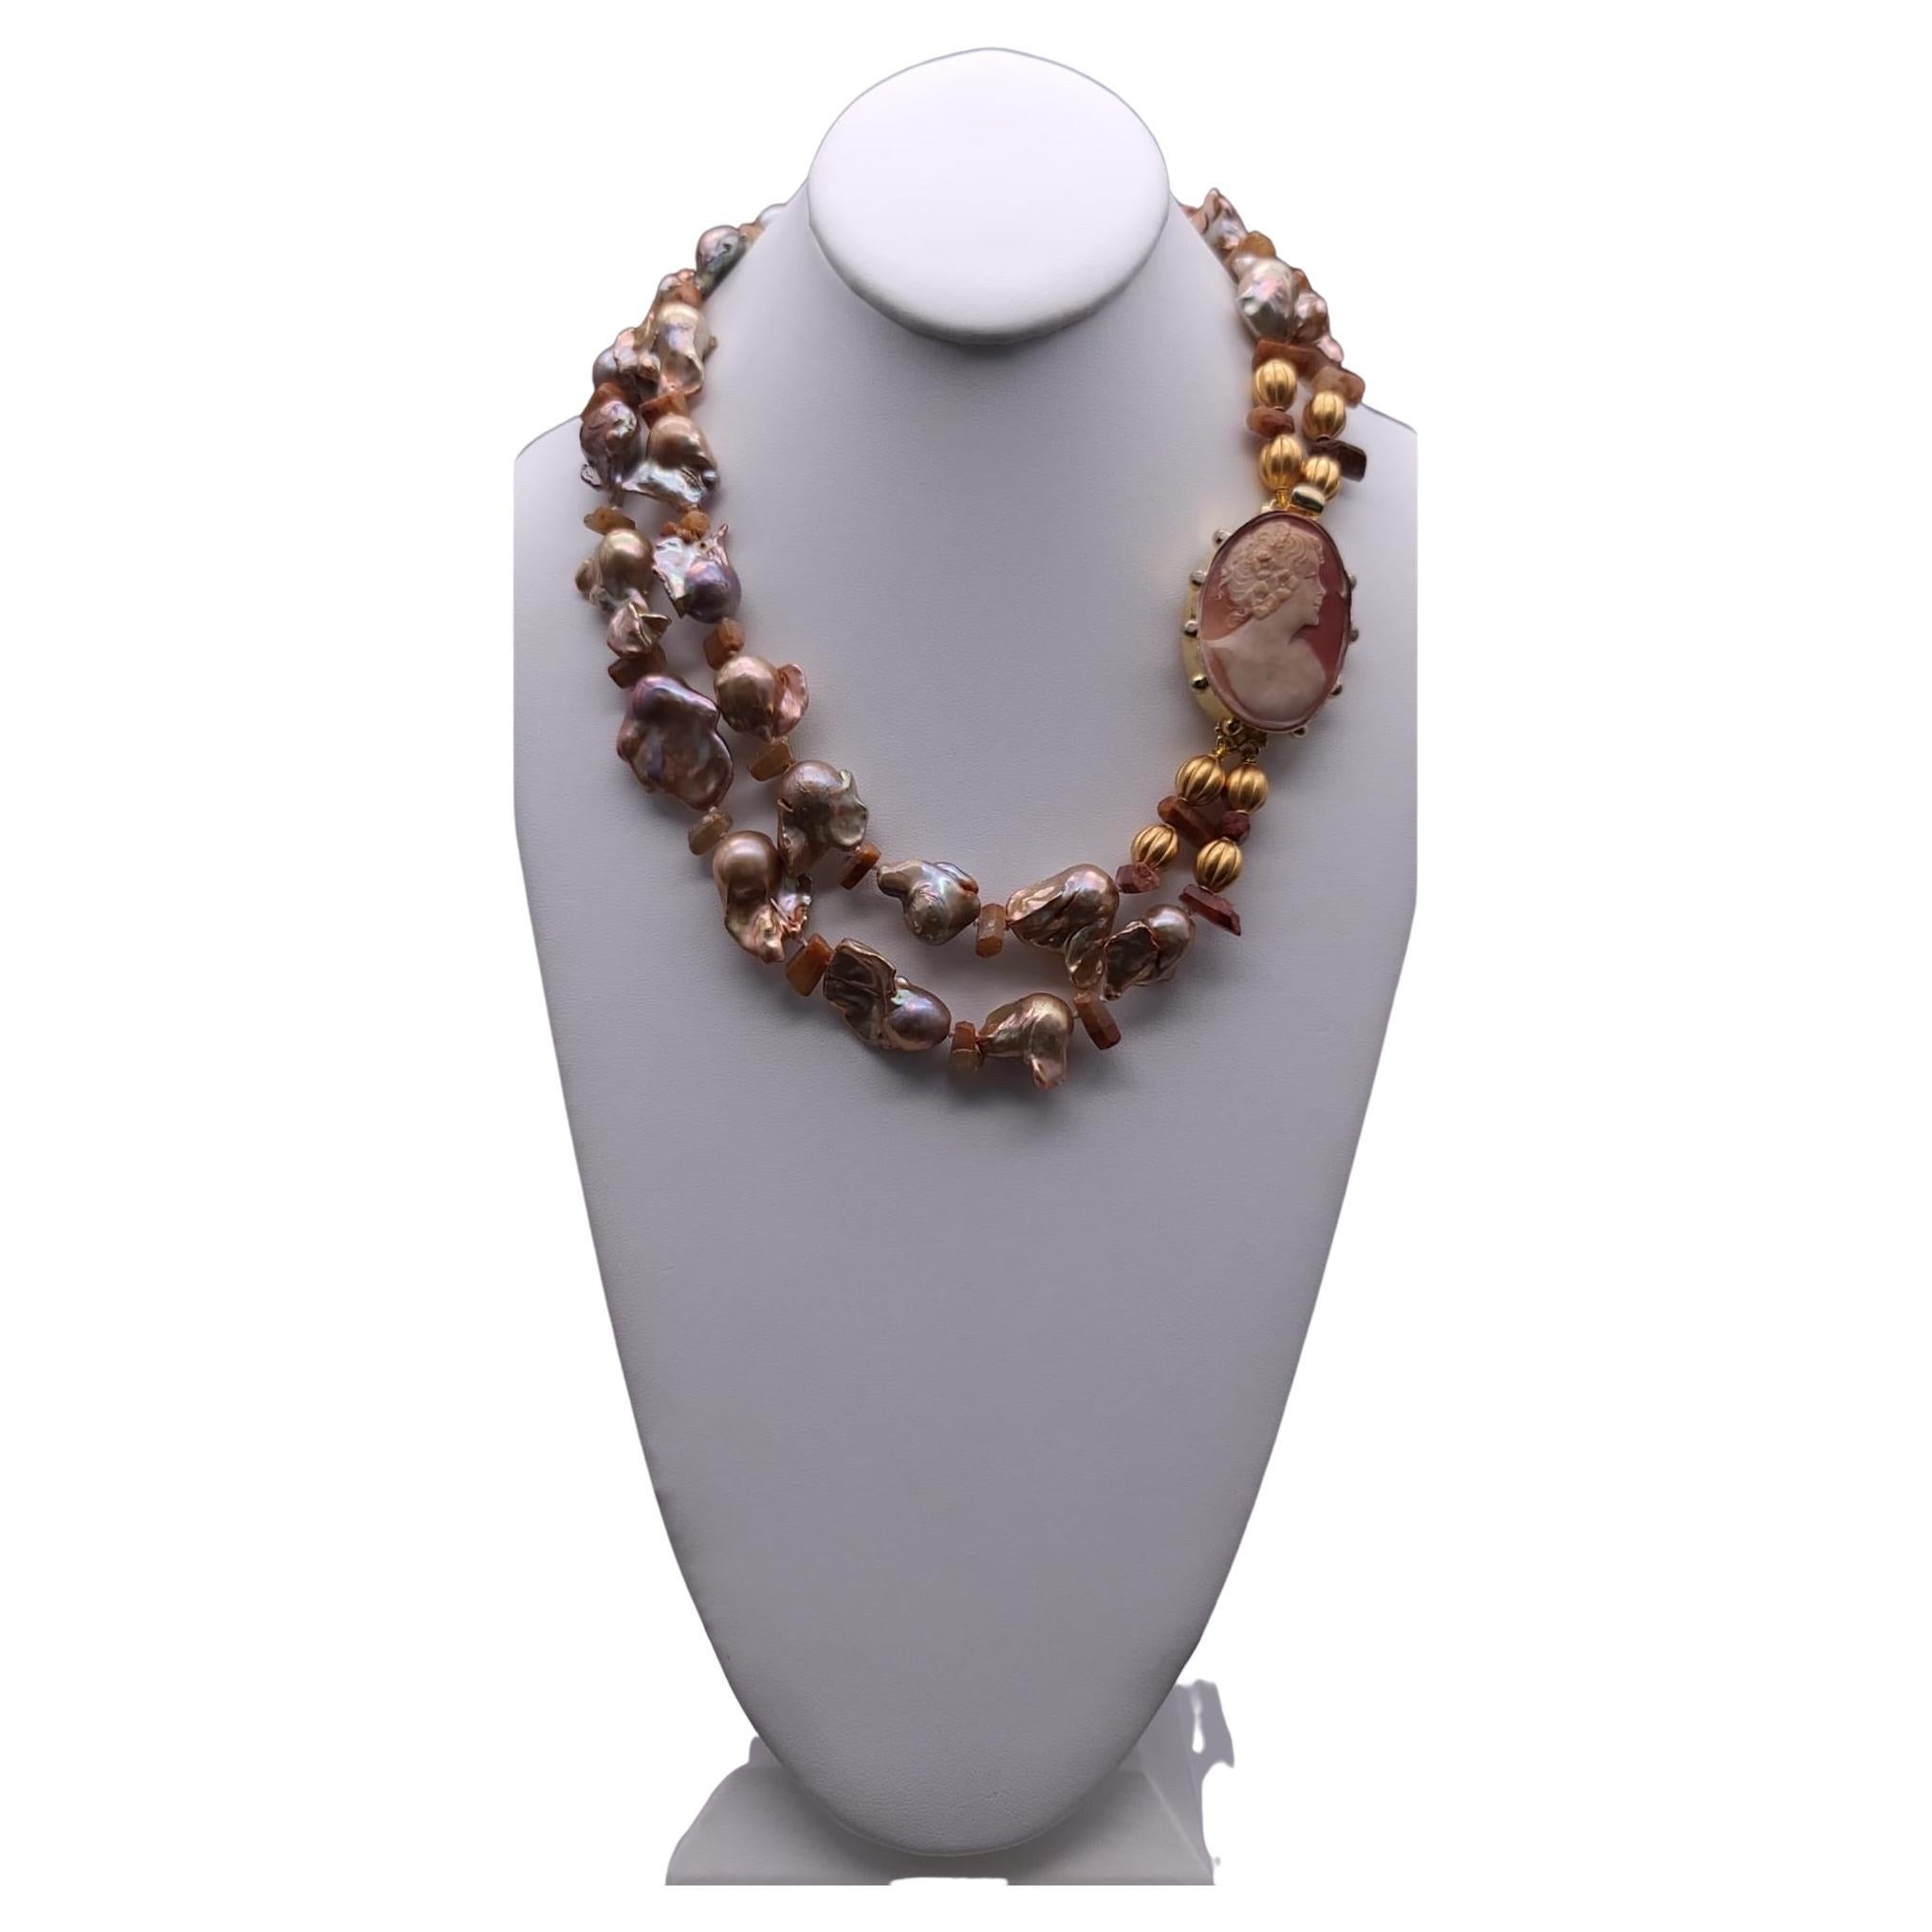 A.Jeschel Stunning Gold Baroque Pearl necklace with an Italian cameo side clasp.